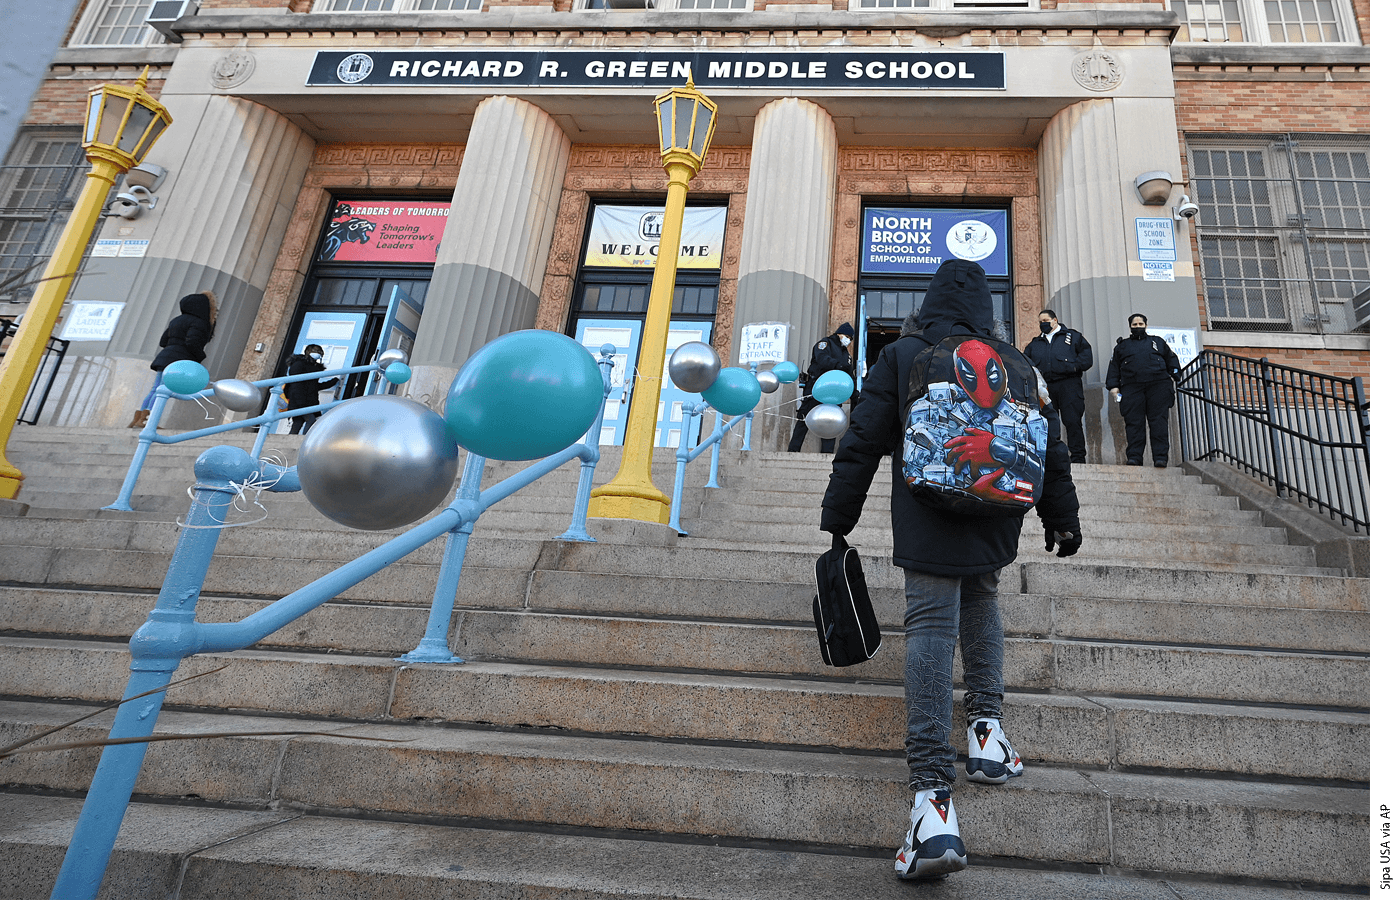 A student climbs the steps at Richard R. Green Middle School in the Bronx borough of New York City, February 25, 2021.